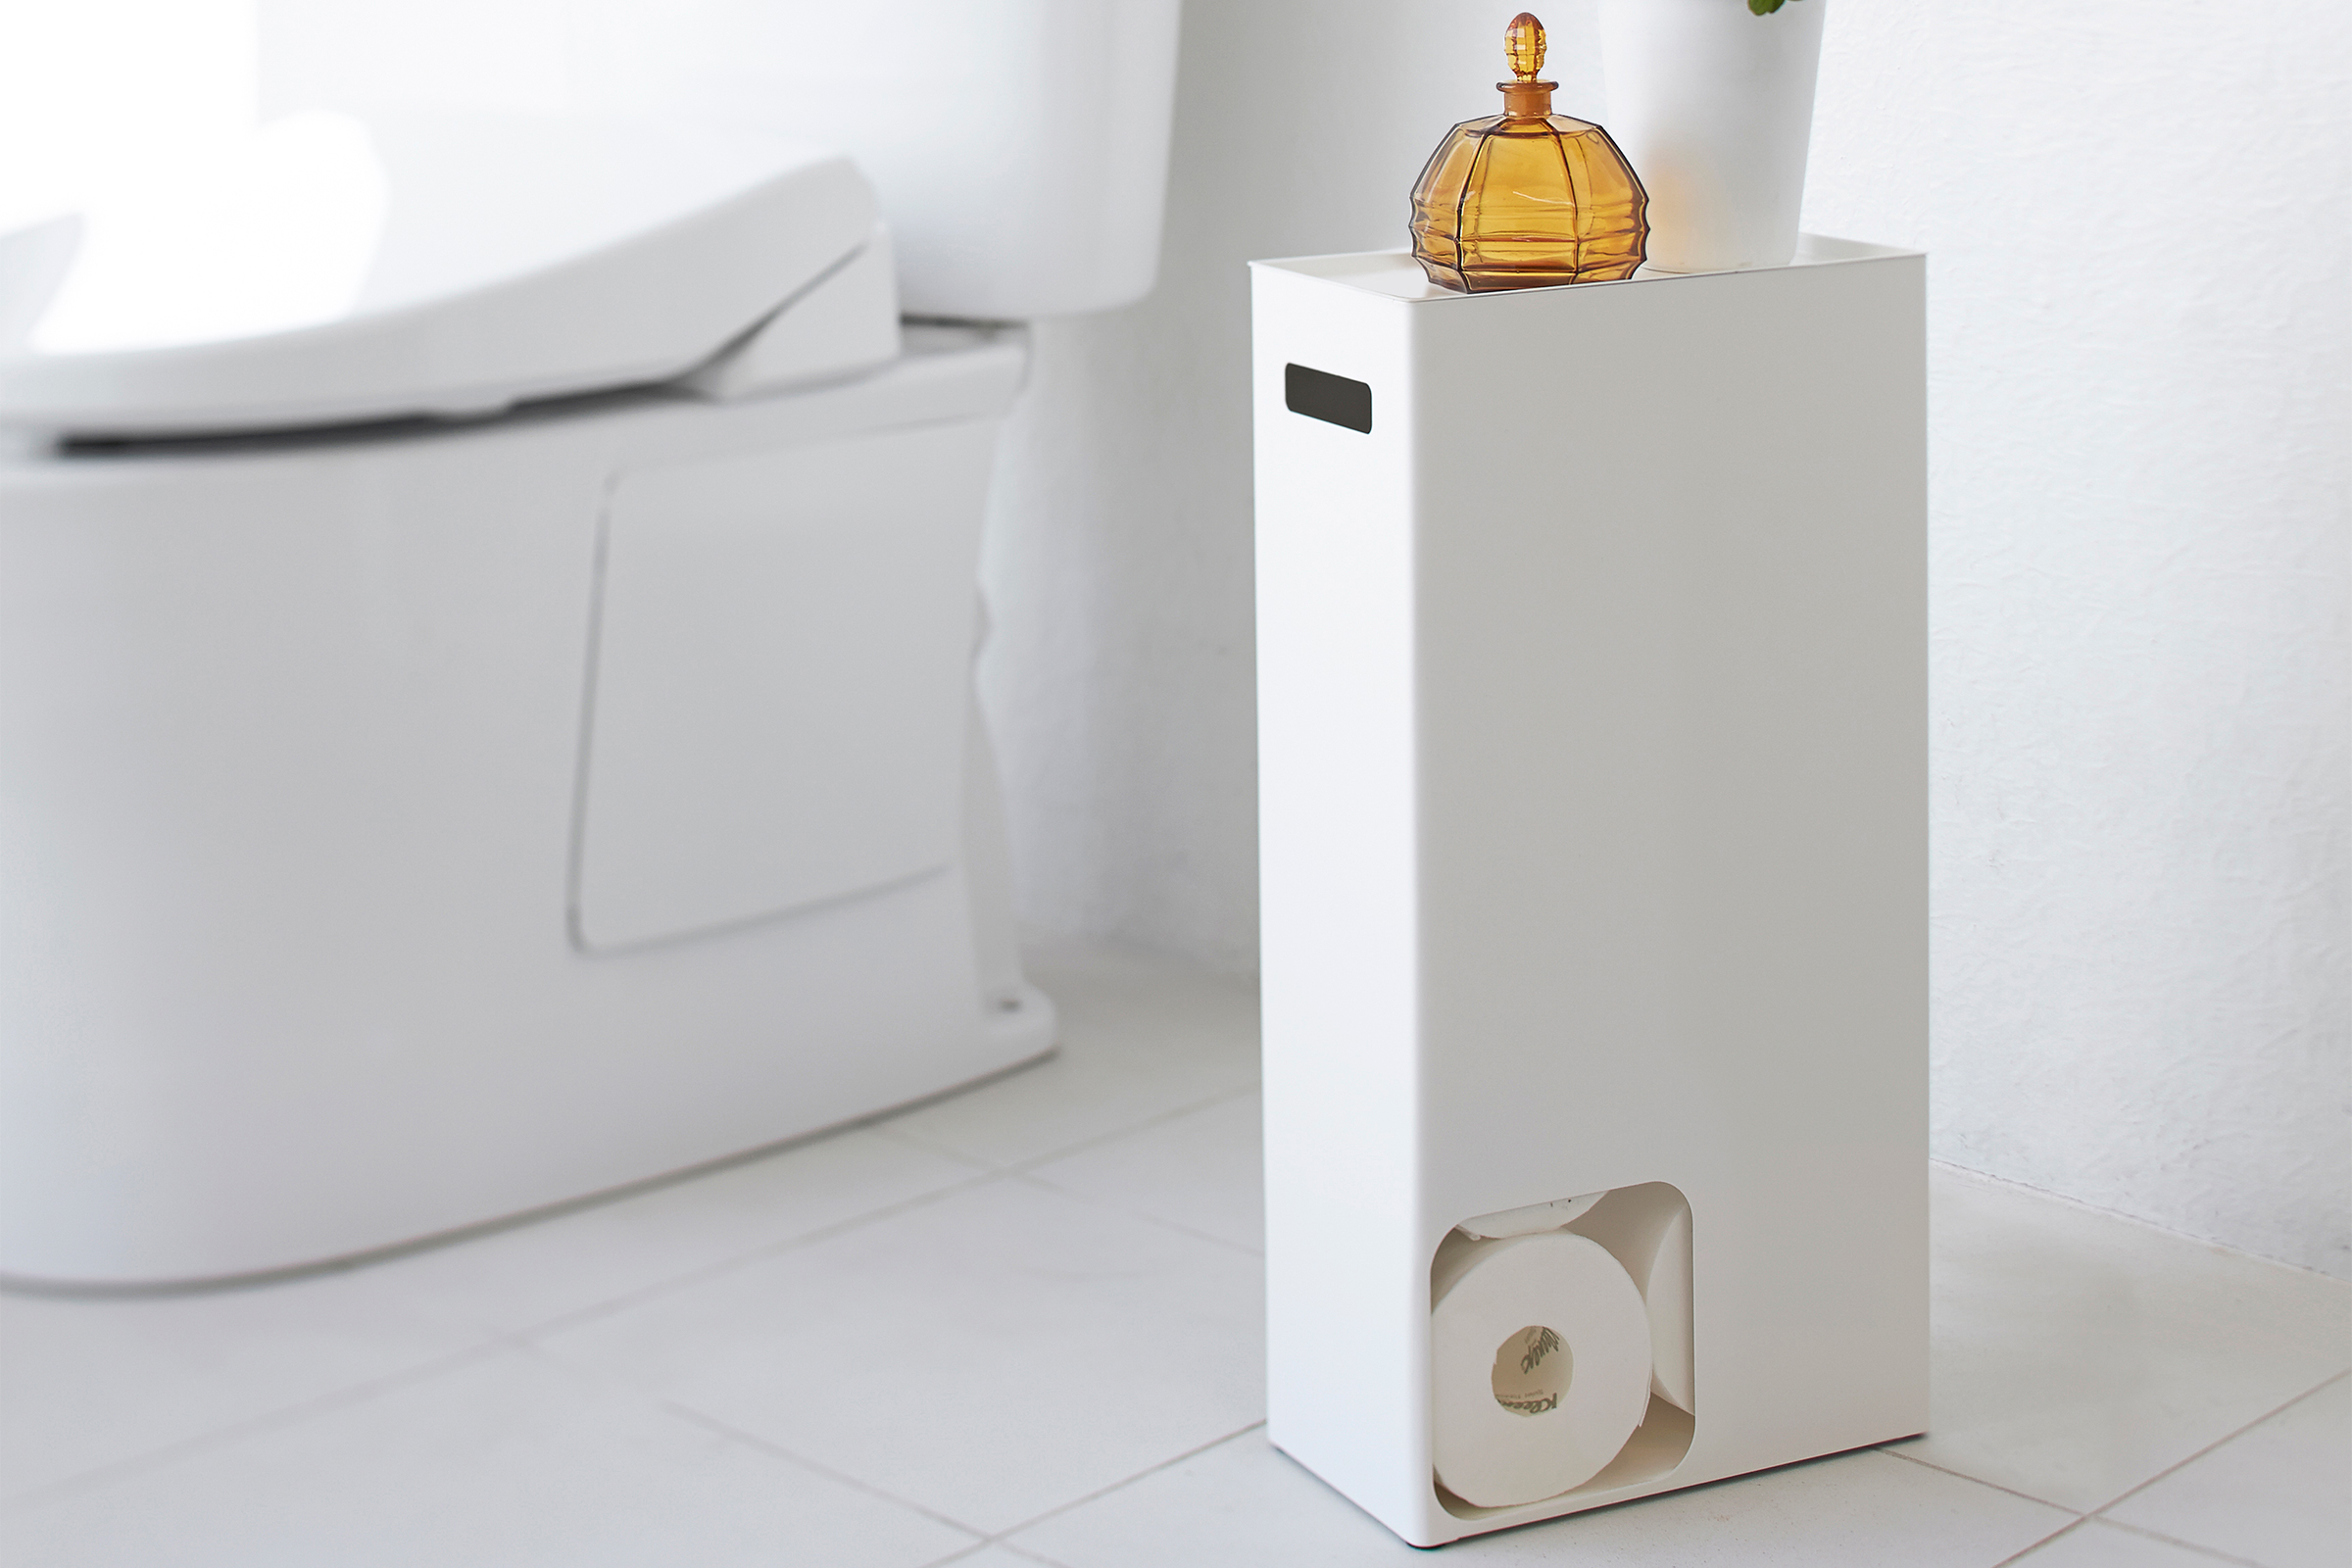 Front view of Yamazaki Home white Toilet Paper Stocker holding toilet paper and home decor items in bathroom.